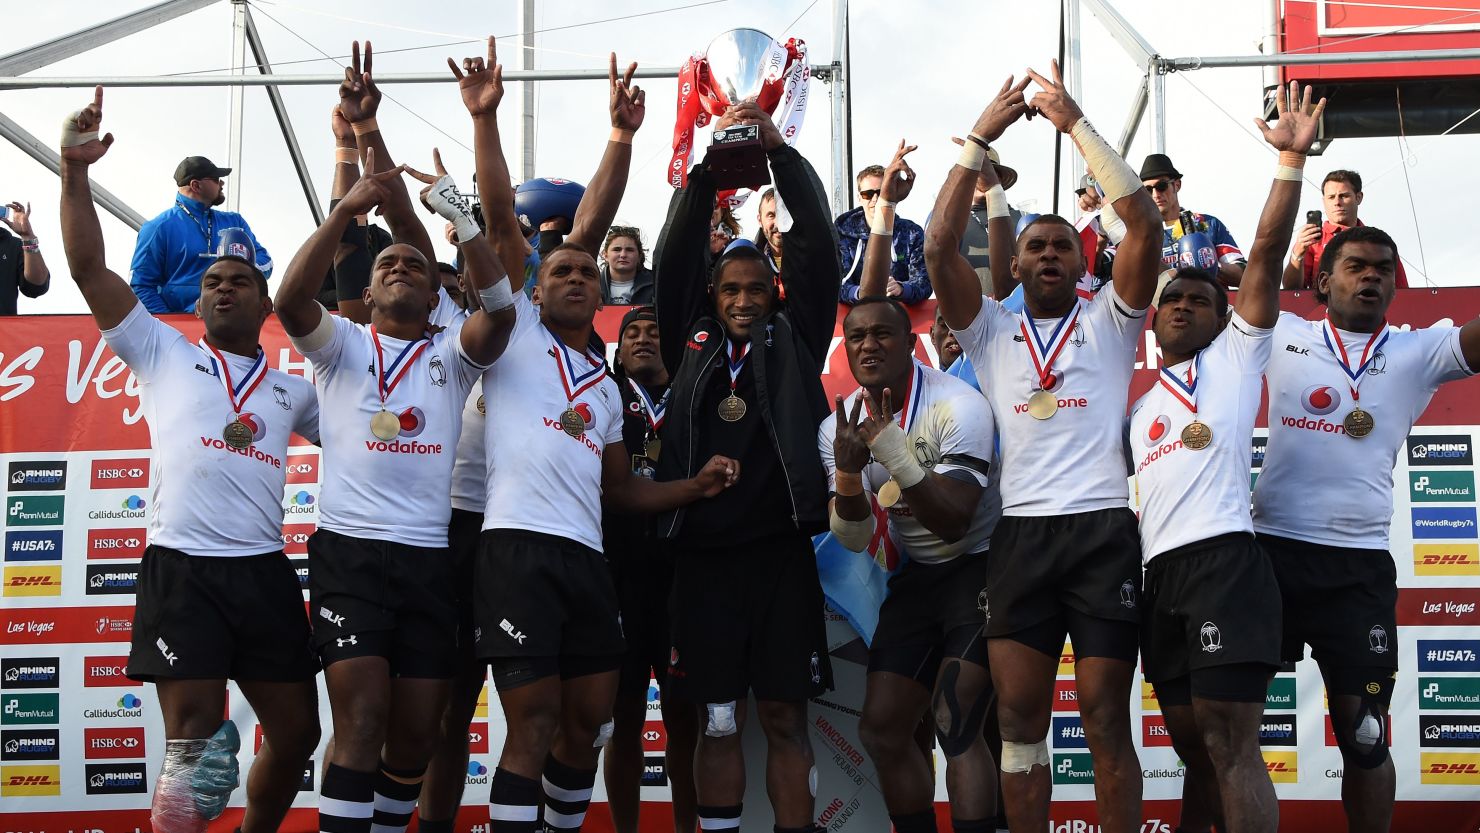 Members of the Fiji team celebrate their 21-15 over Australia in the final of the Las Vegas leg of the 2015-16 World Sevens Series